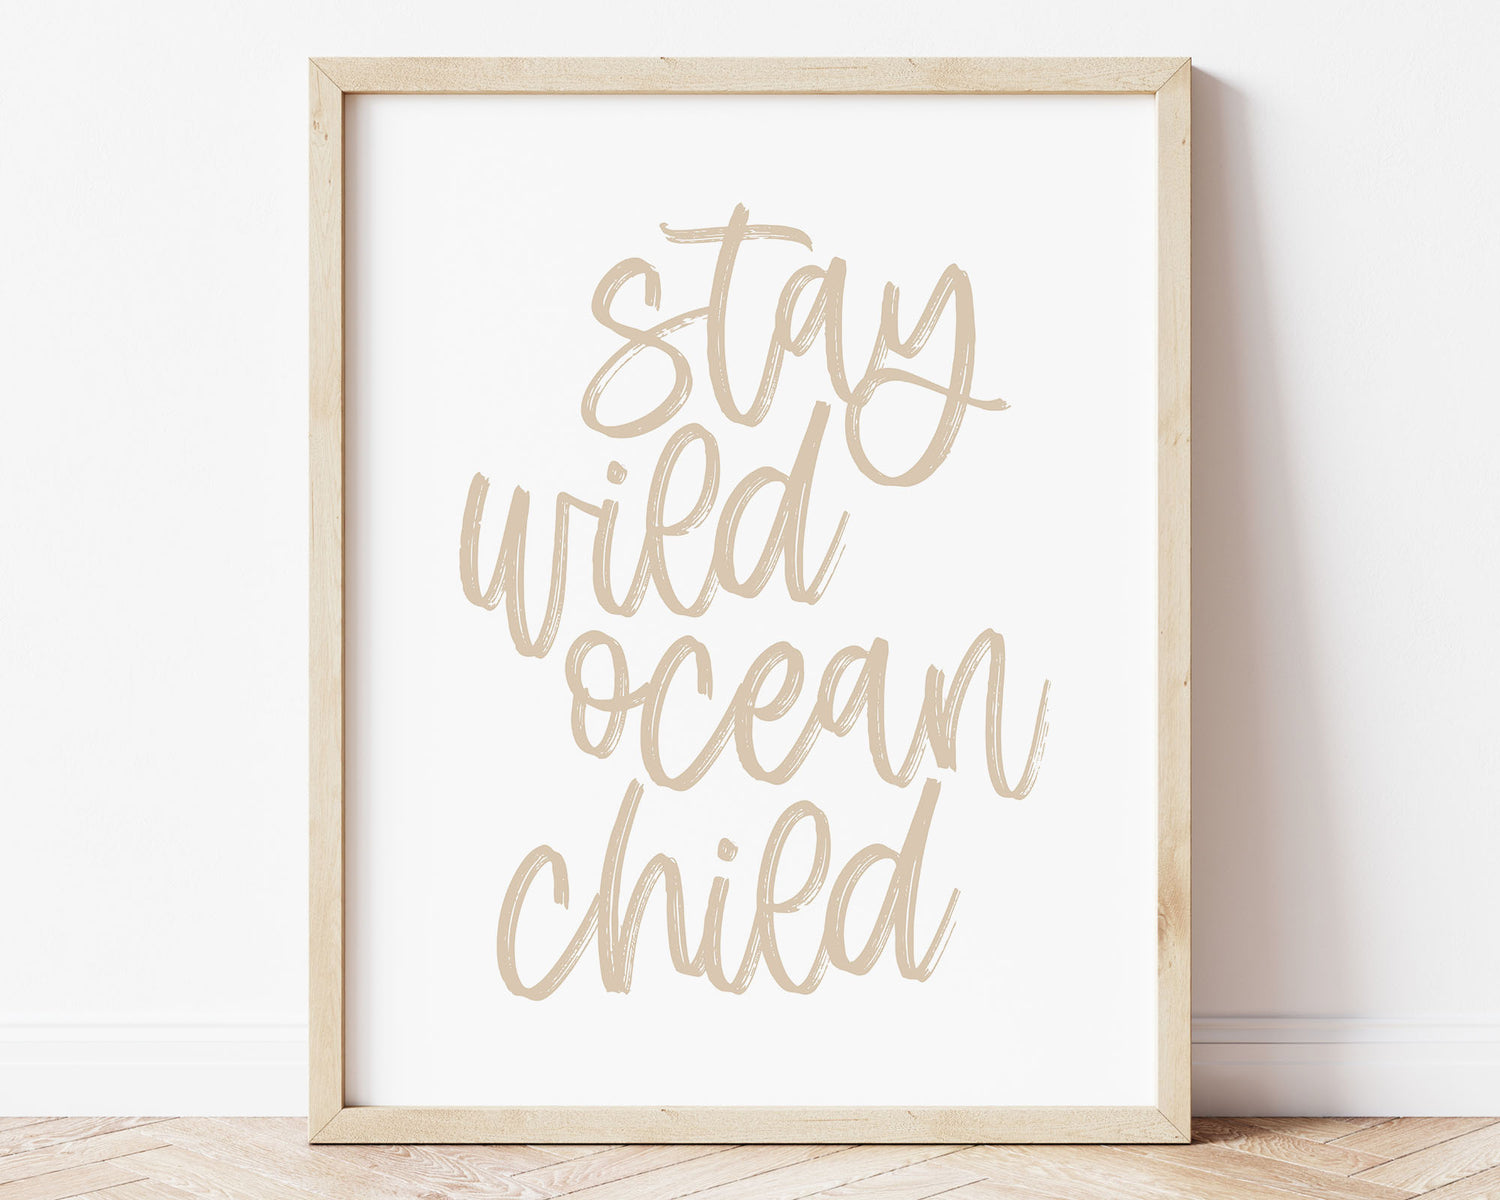 Neutral Tan Stay Wild Ocean Child Printable Wall Art featuring a textured brush style cursive lettered quote in a soft, neutral brown color. Perfect for Baby Boy Nautical Nursery Decor, Baby Girl Surf Nursery Wall Art, Gender Neutral Beach Nursery Art, Nautical Kids Bedroom Decor or Children's Coastal Bathroom Wall Art.